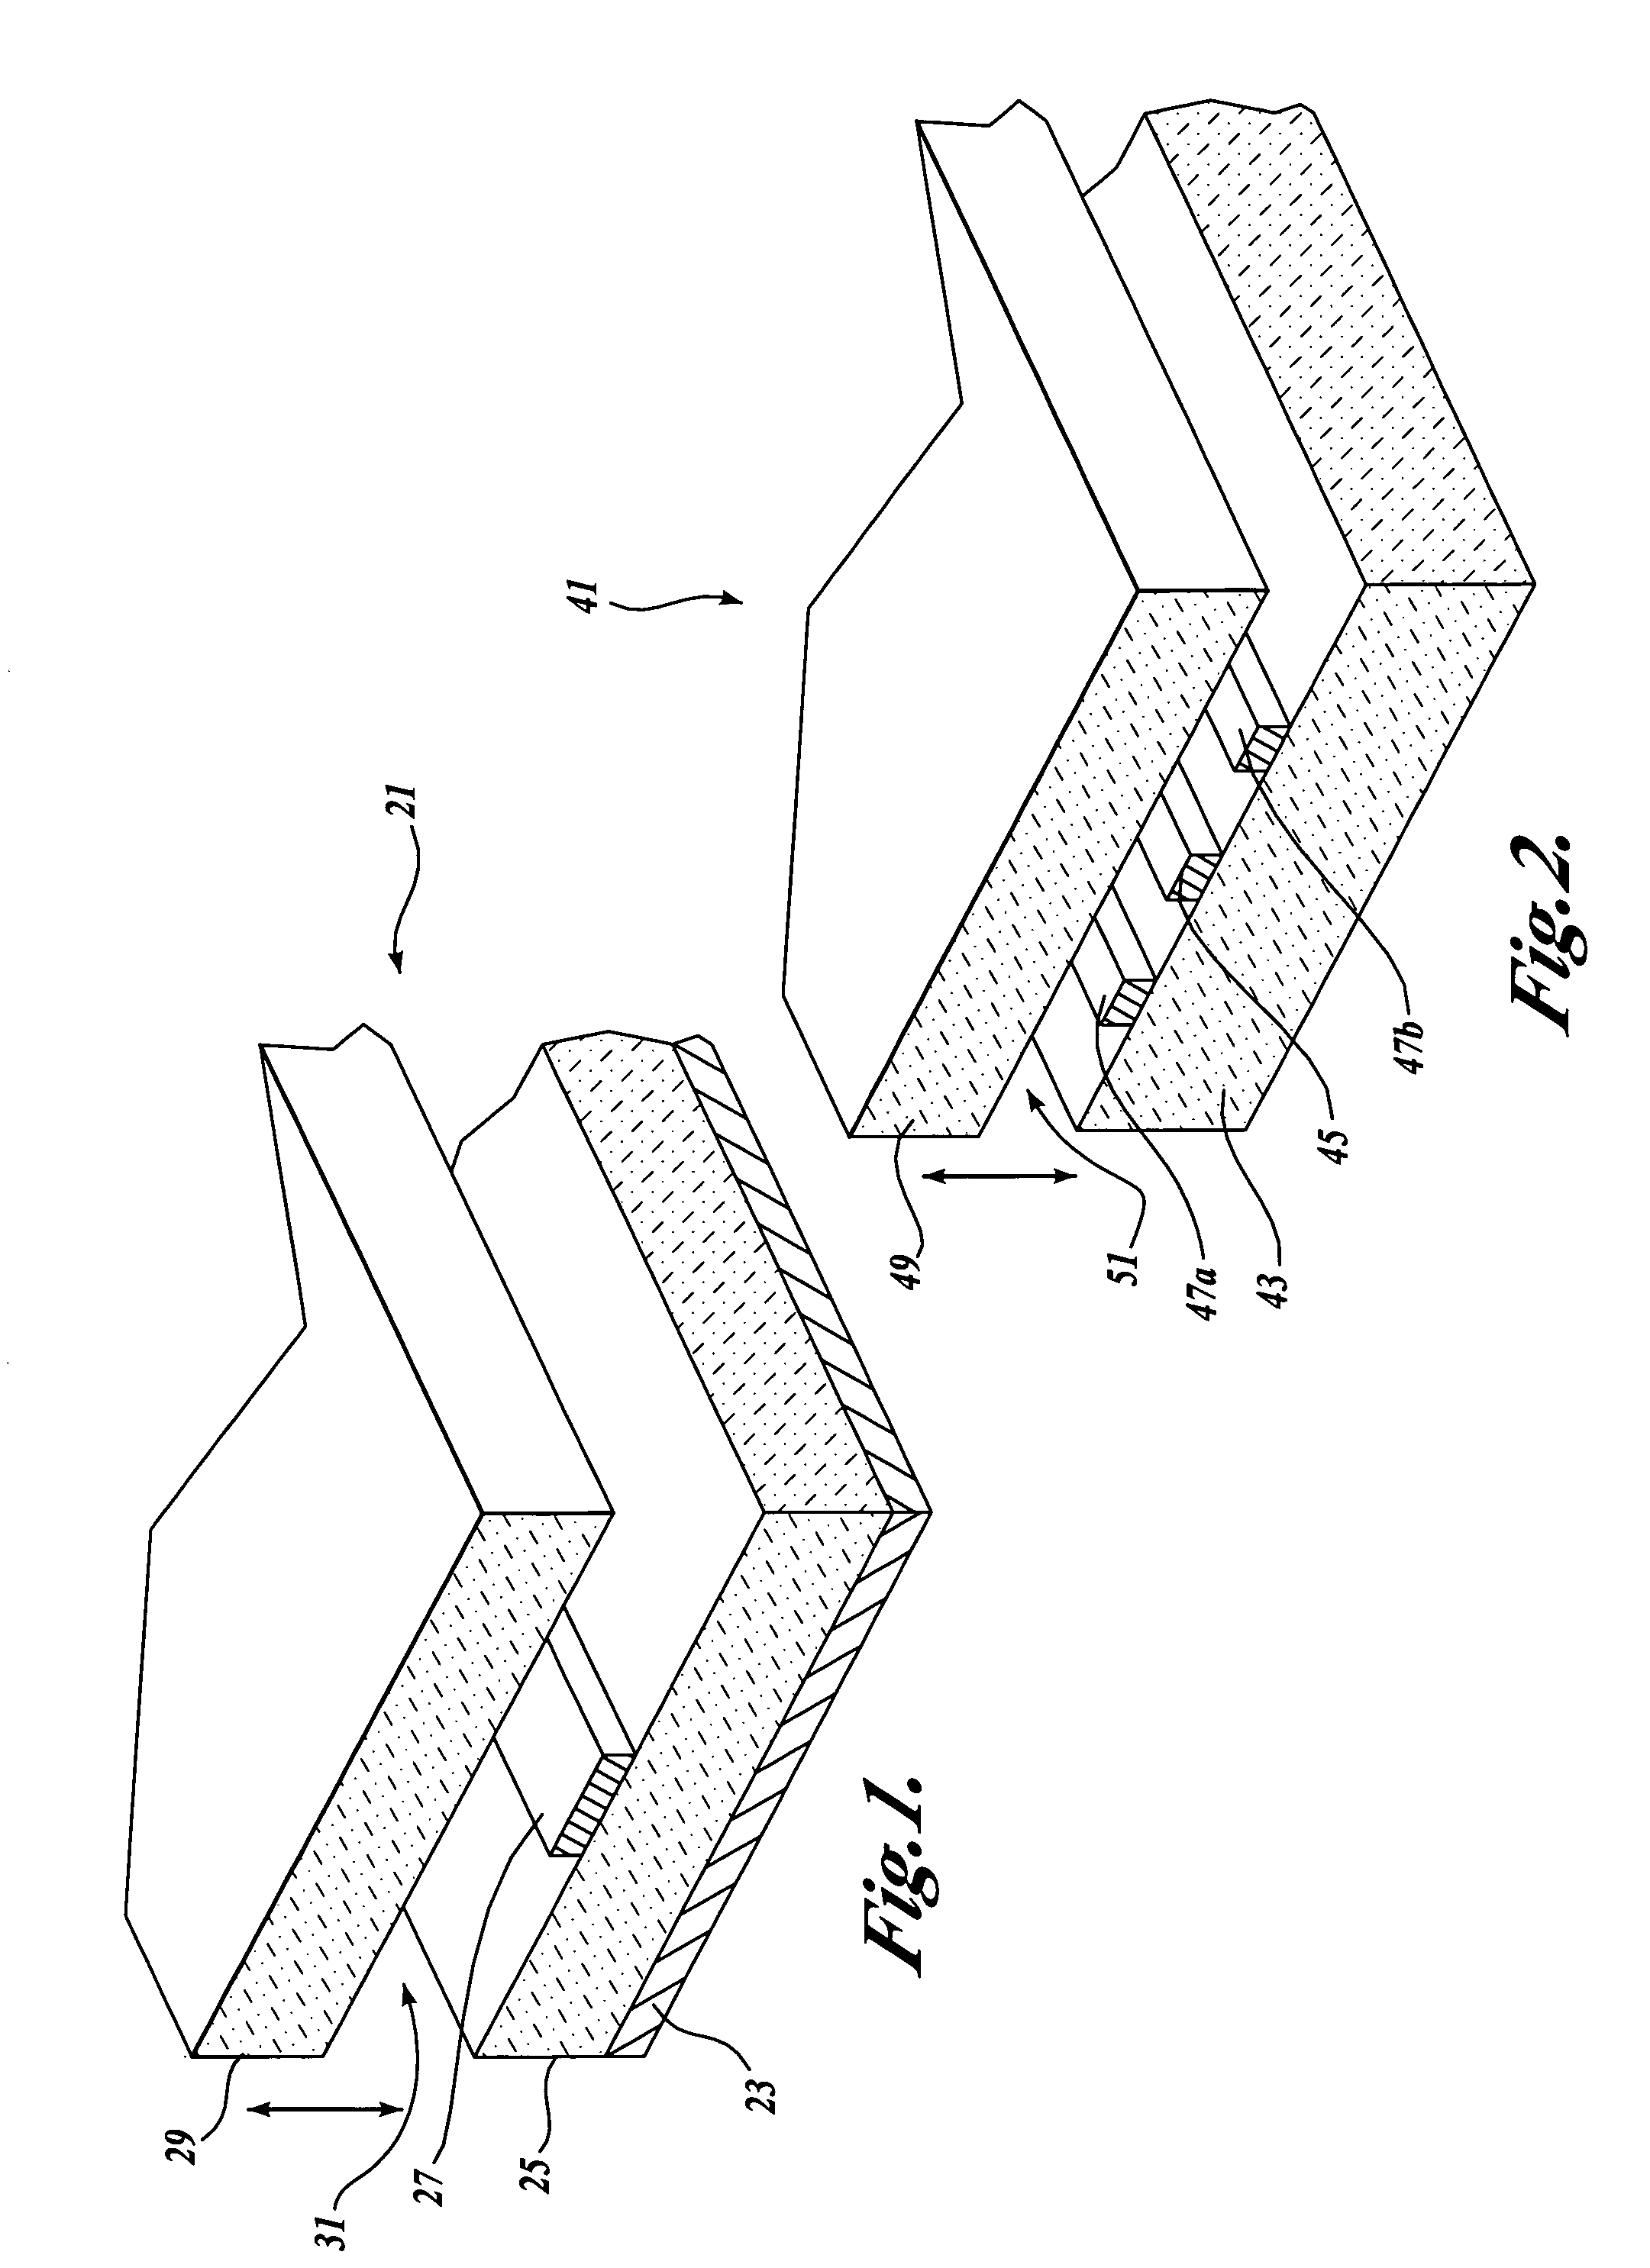 Transmission line phase shifter with controllable high permittivity dielectric element